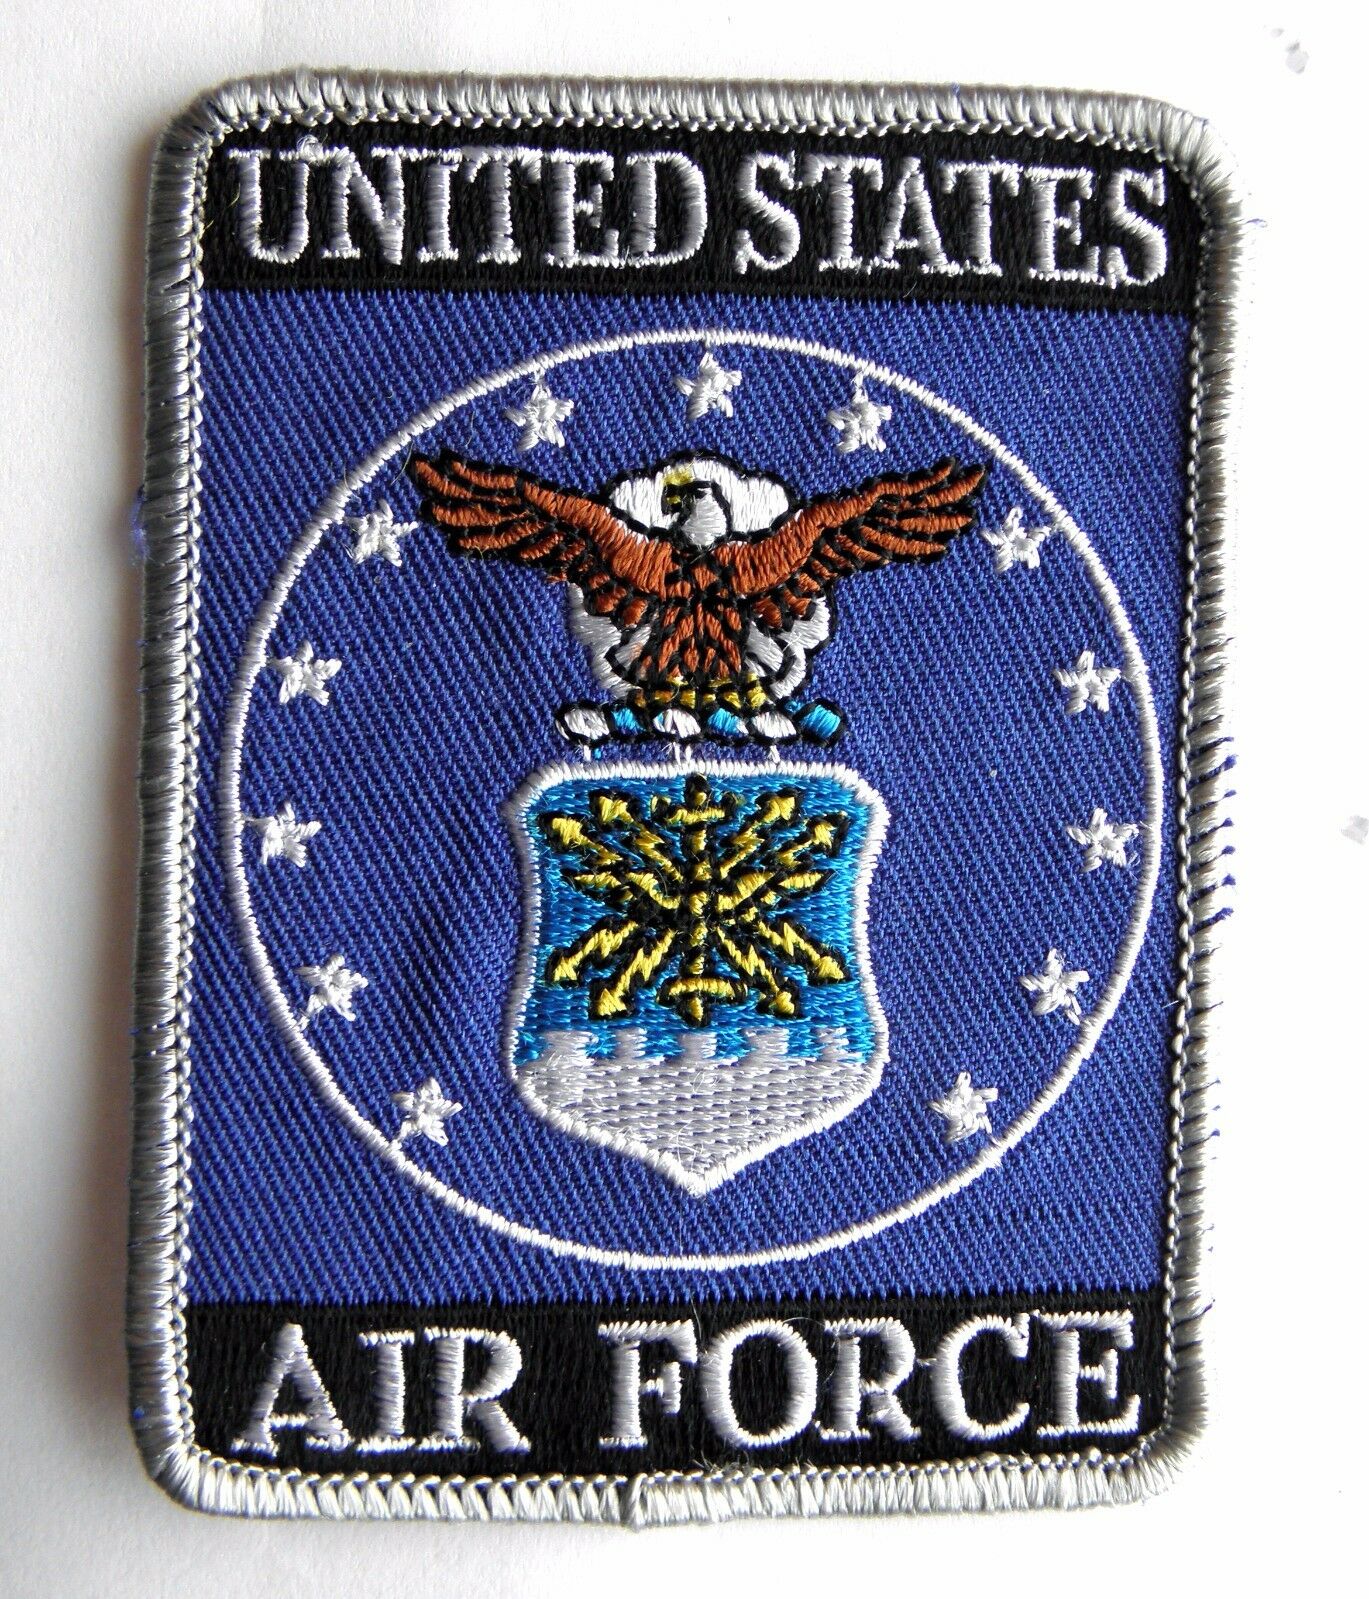 USAAF Embroidered Patch